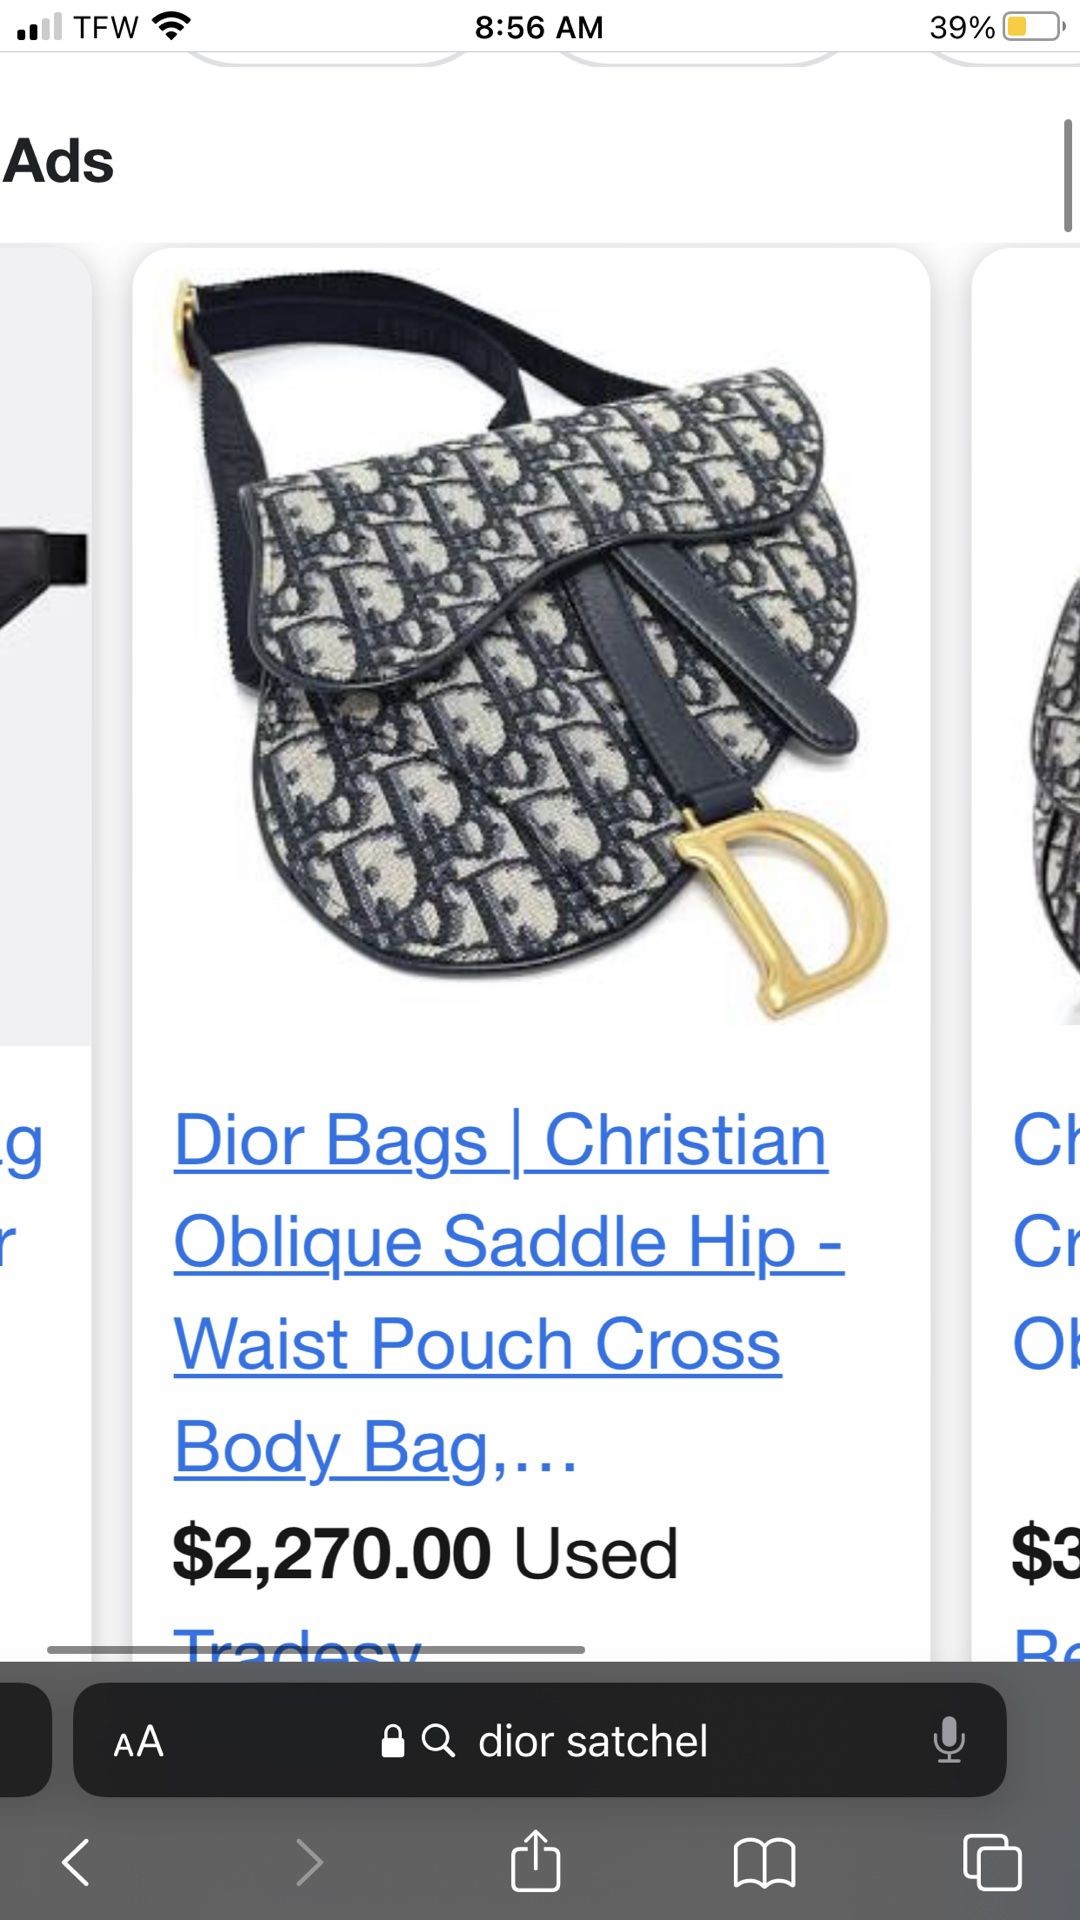 Dior Bag Going For Cheap